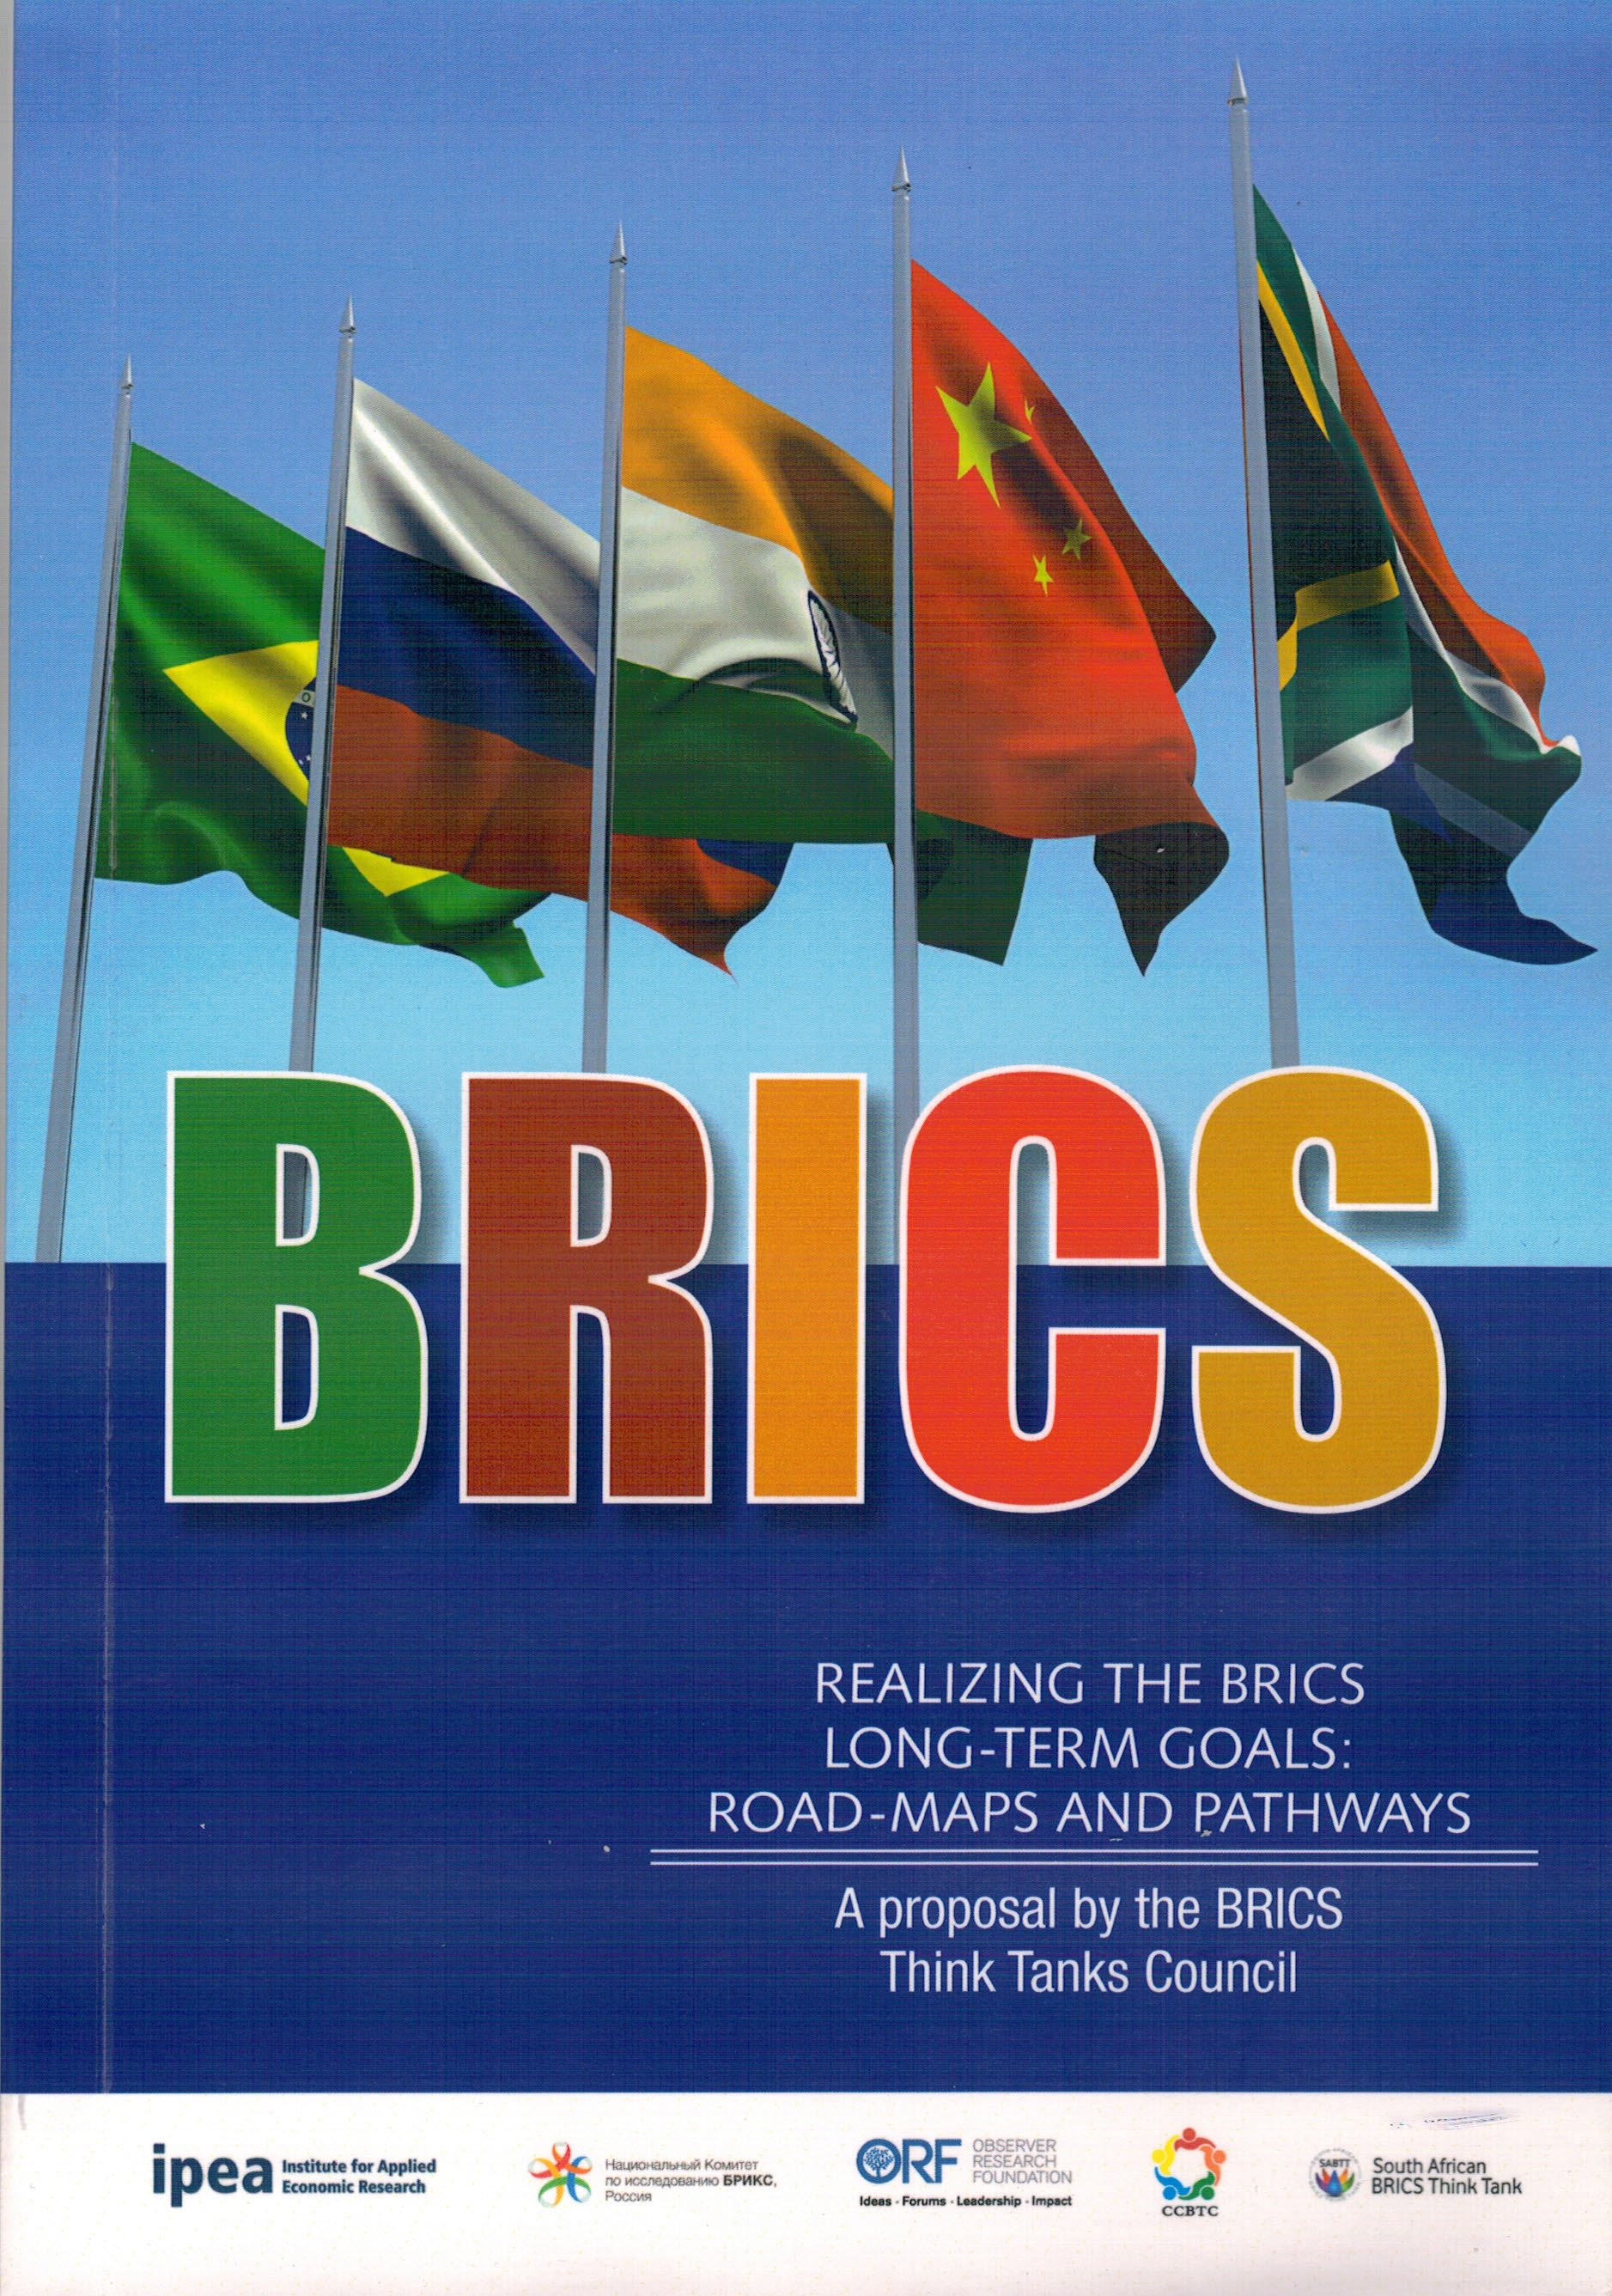 Realizing the brics long term goals. road maps and pathways. a proposal by the brics think tanks council.